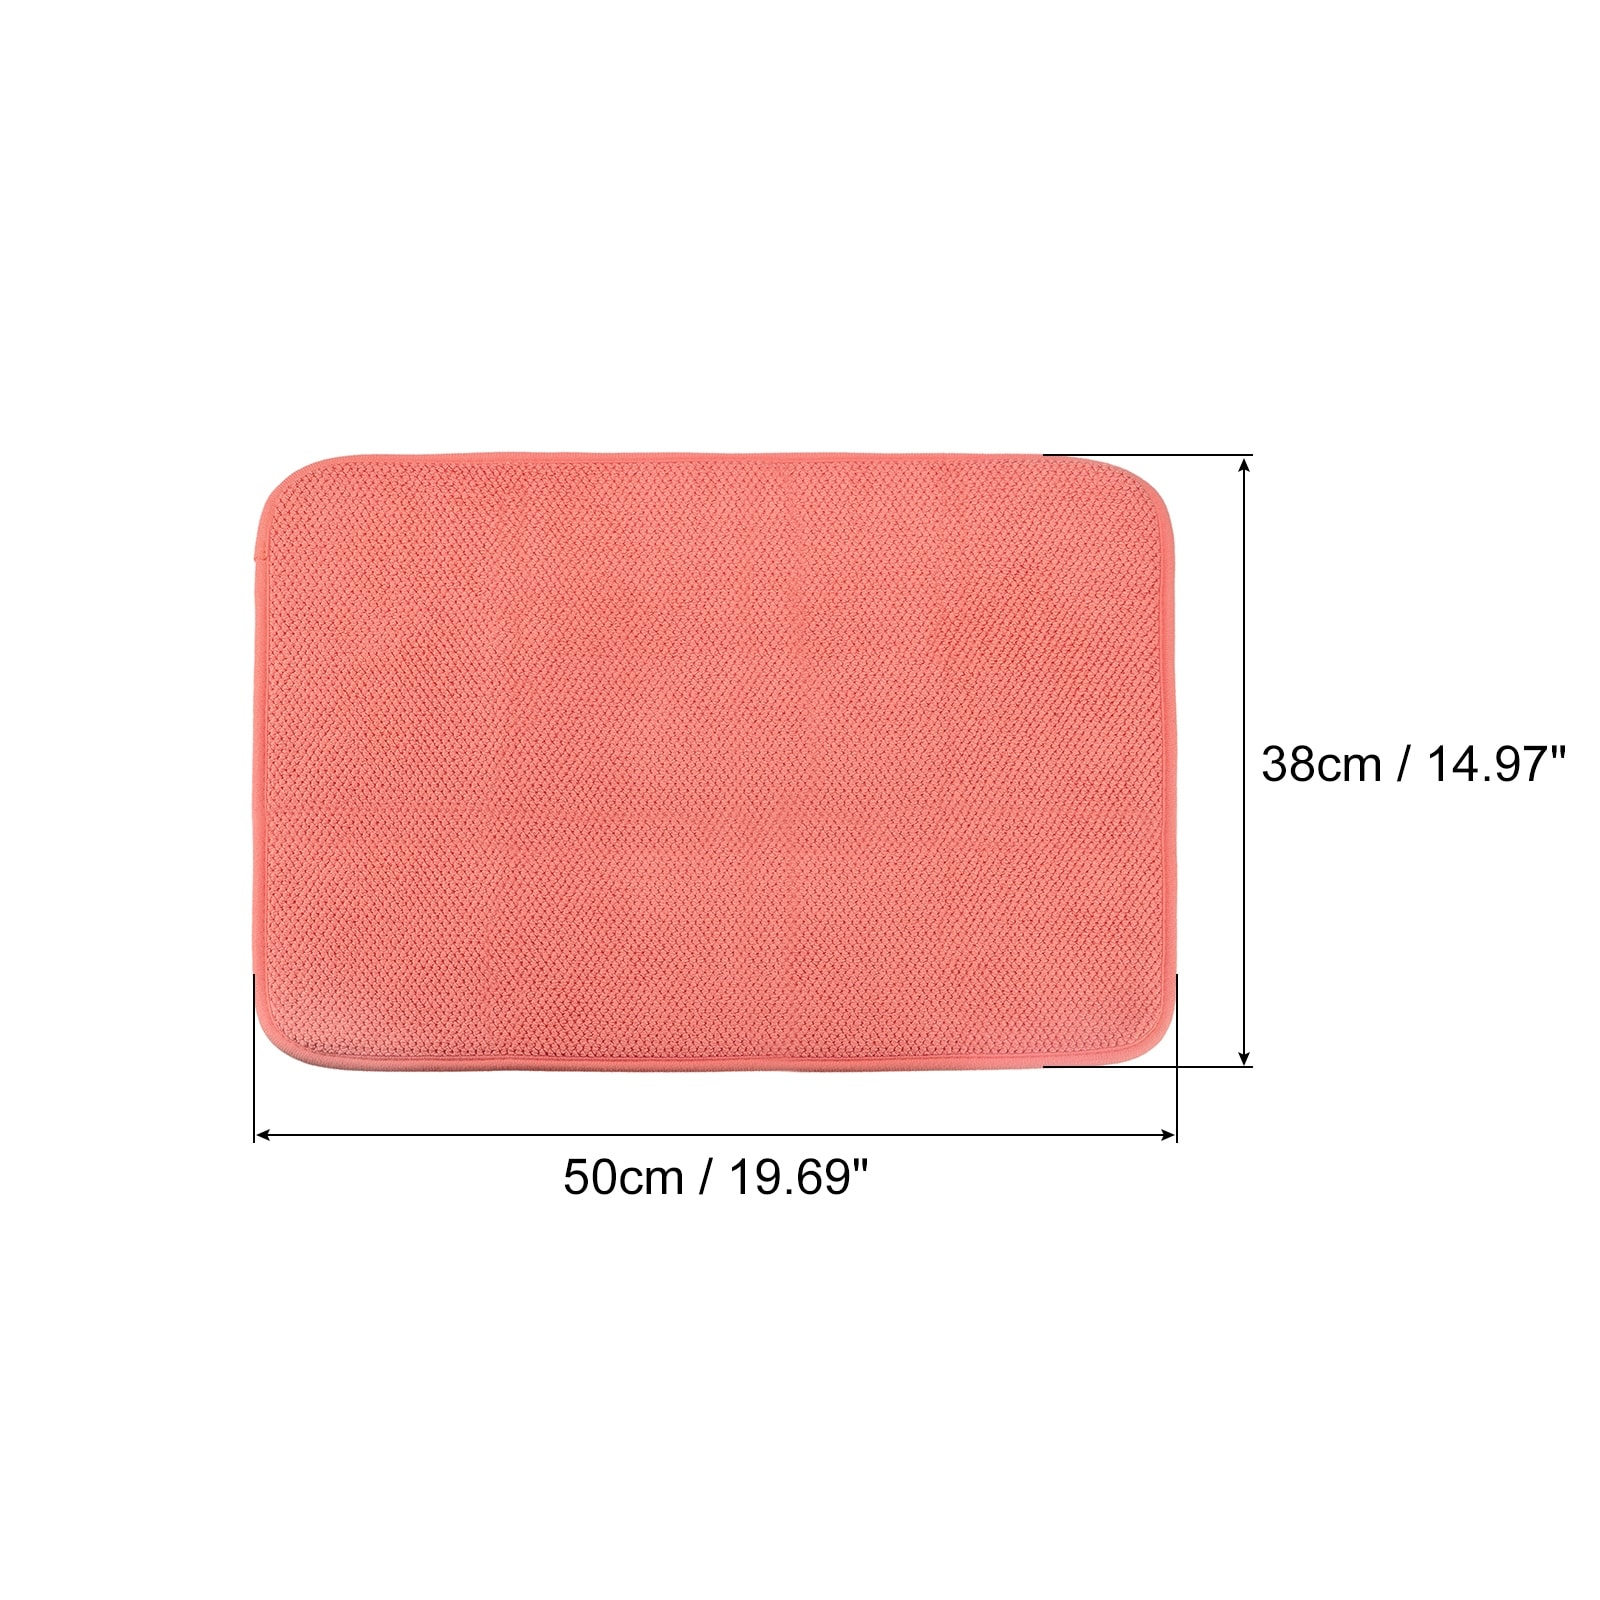 Kitchen Microfiber Quick Drying Mat (15 x 20) RED COLOR by Broder